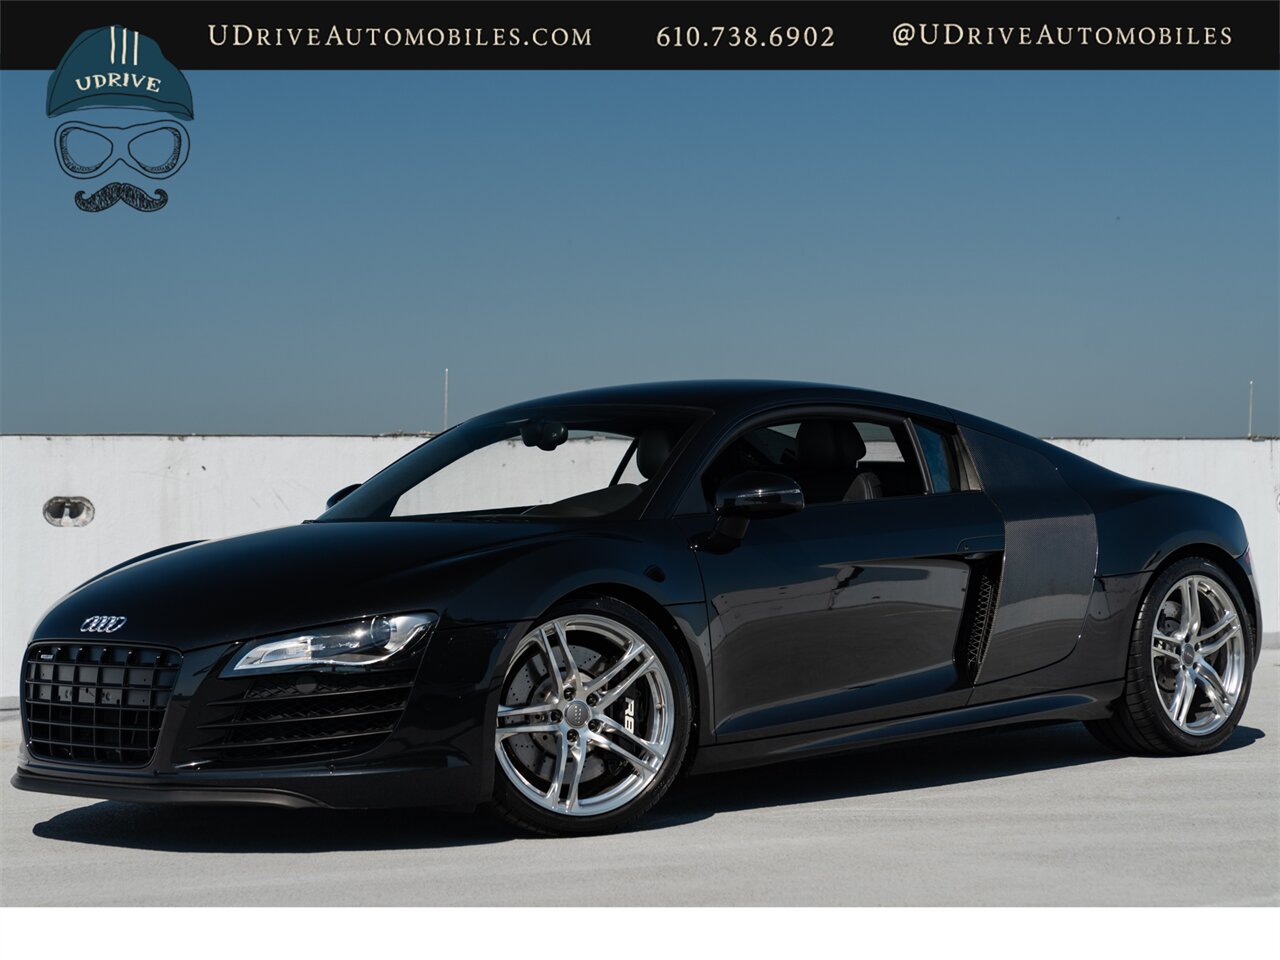 2009 Audi R8 Quattro  4.2L V8 6 Speed Manual - Photo 1 - West Chester, PA 19382